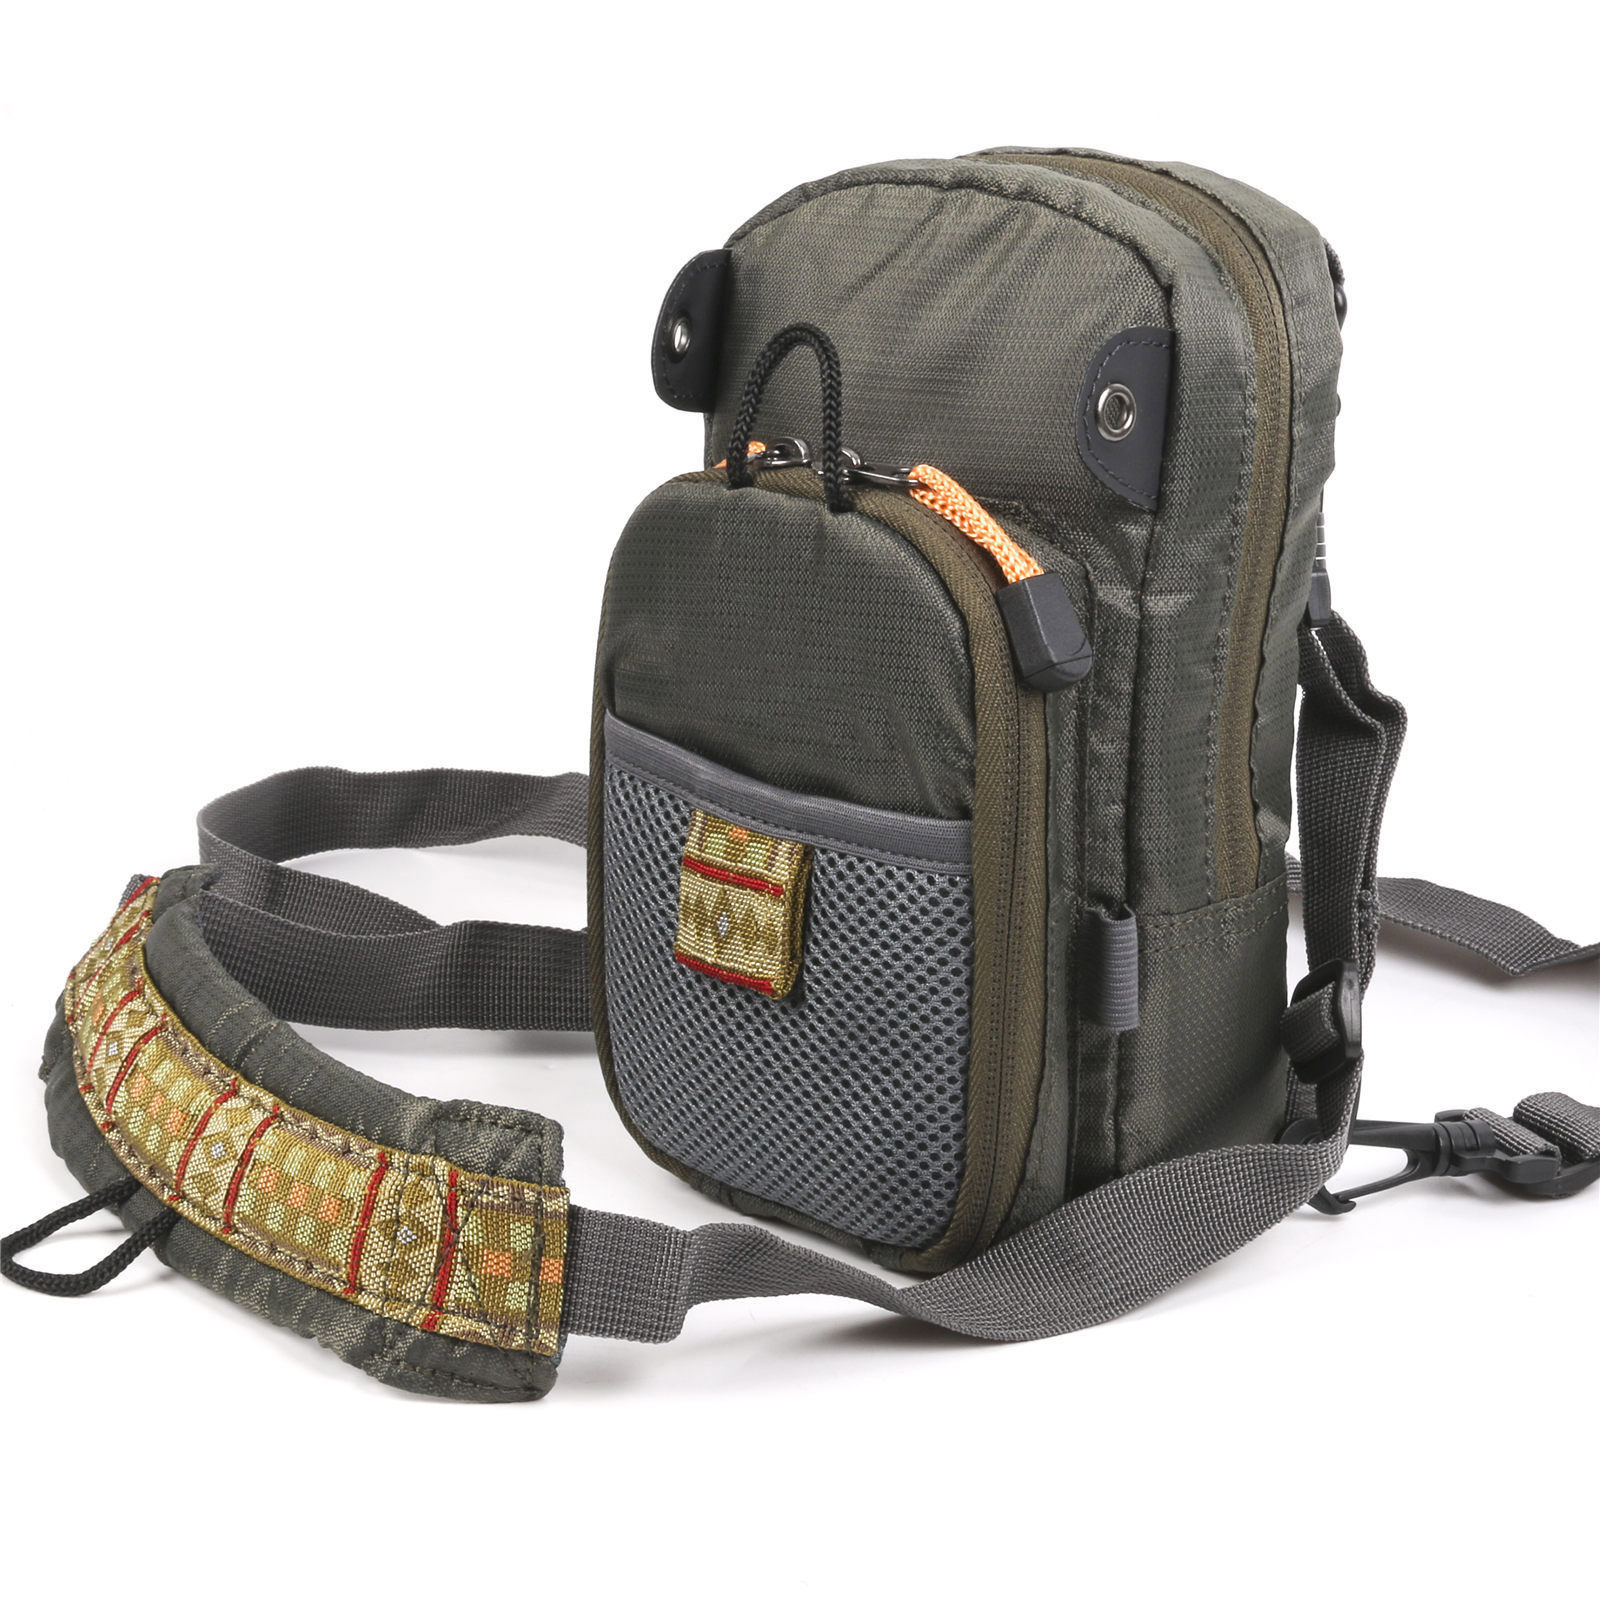 Fly Fishing Chest Pack Light Weight Comfortable Fishing Chest Bag